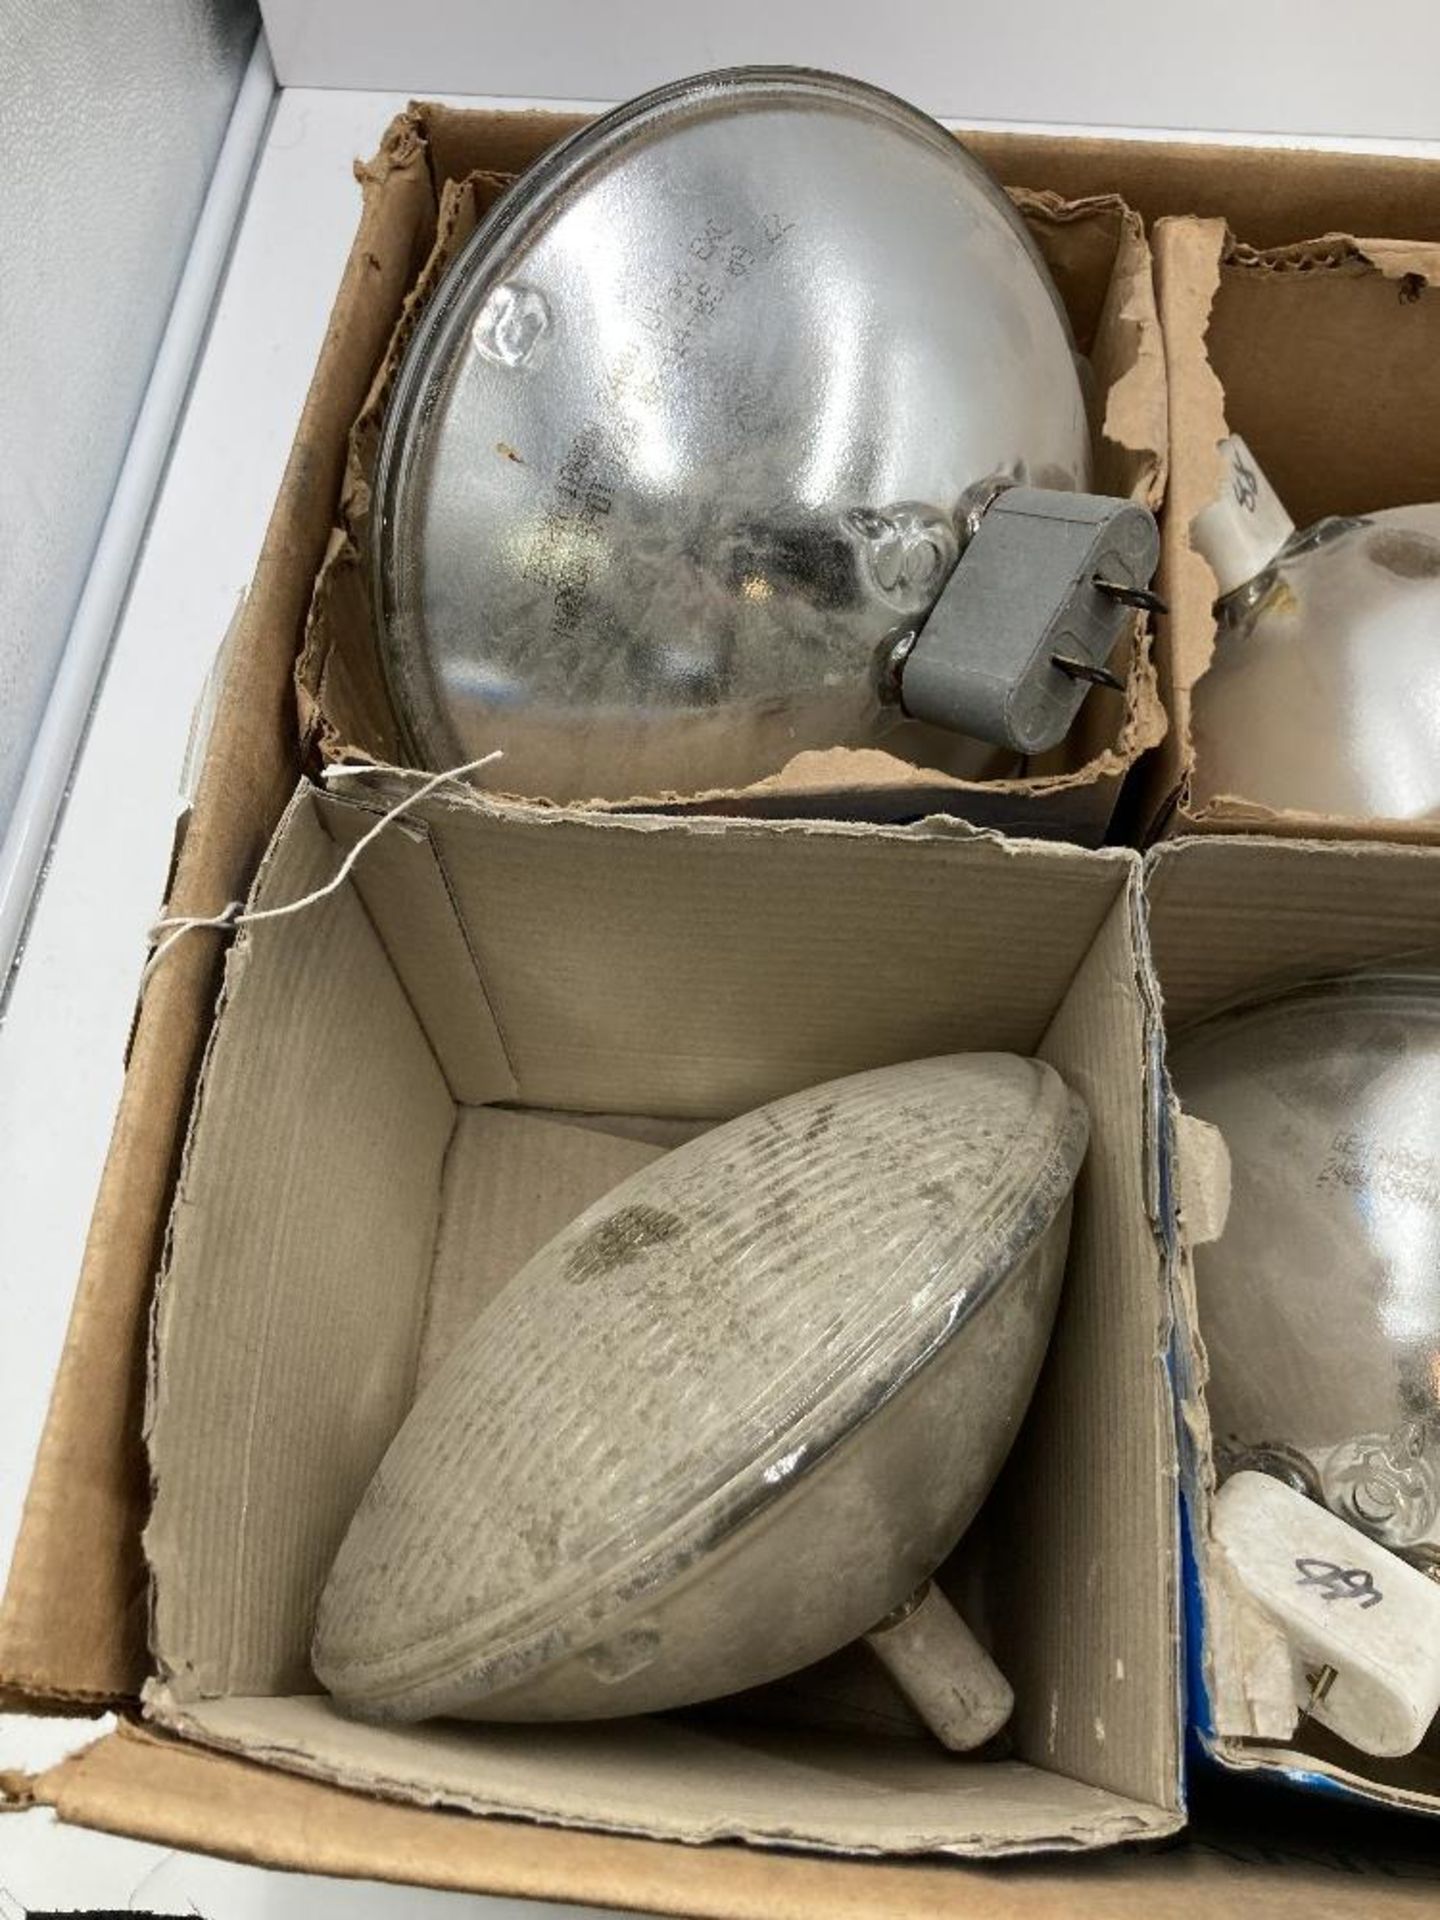 Large Quantity of Various Lamps and Bulbs - Image 16 of 47